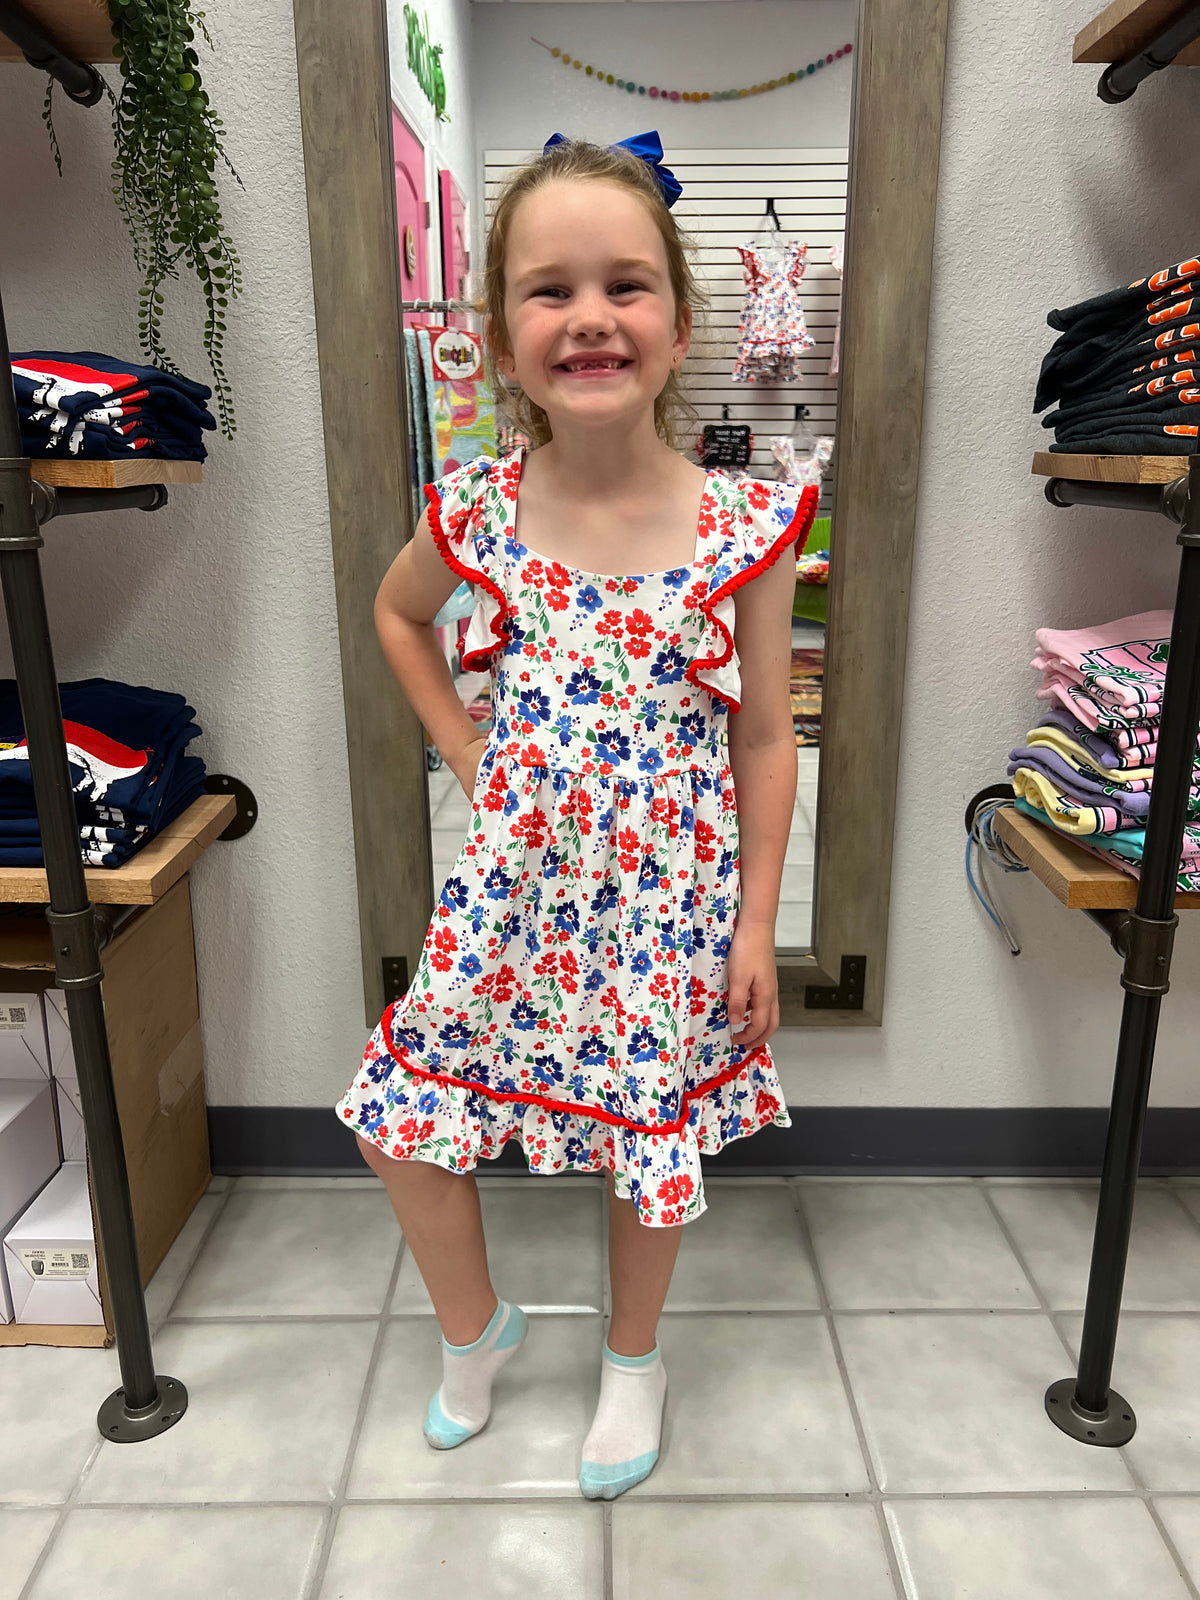 Red white and blue poppy dress